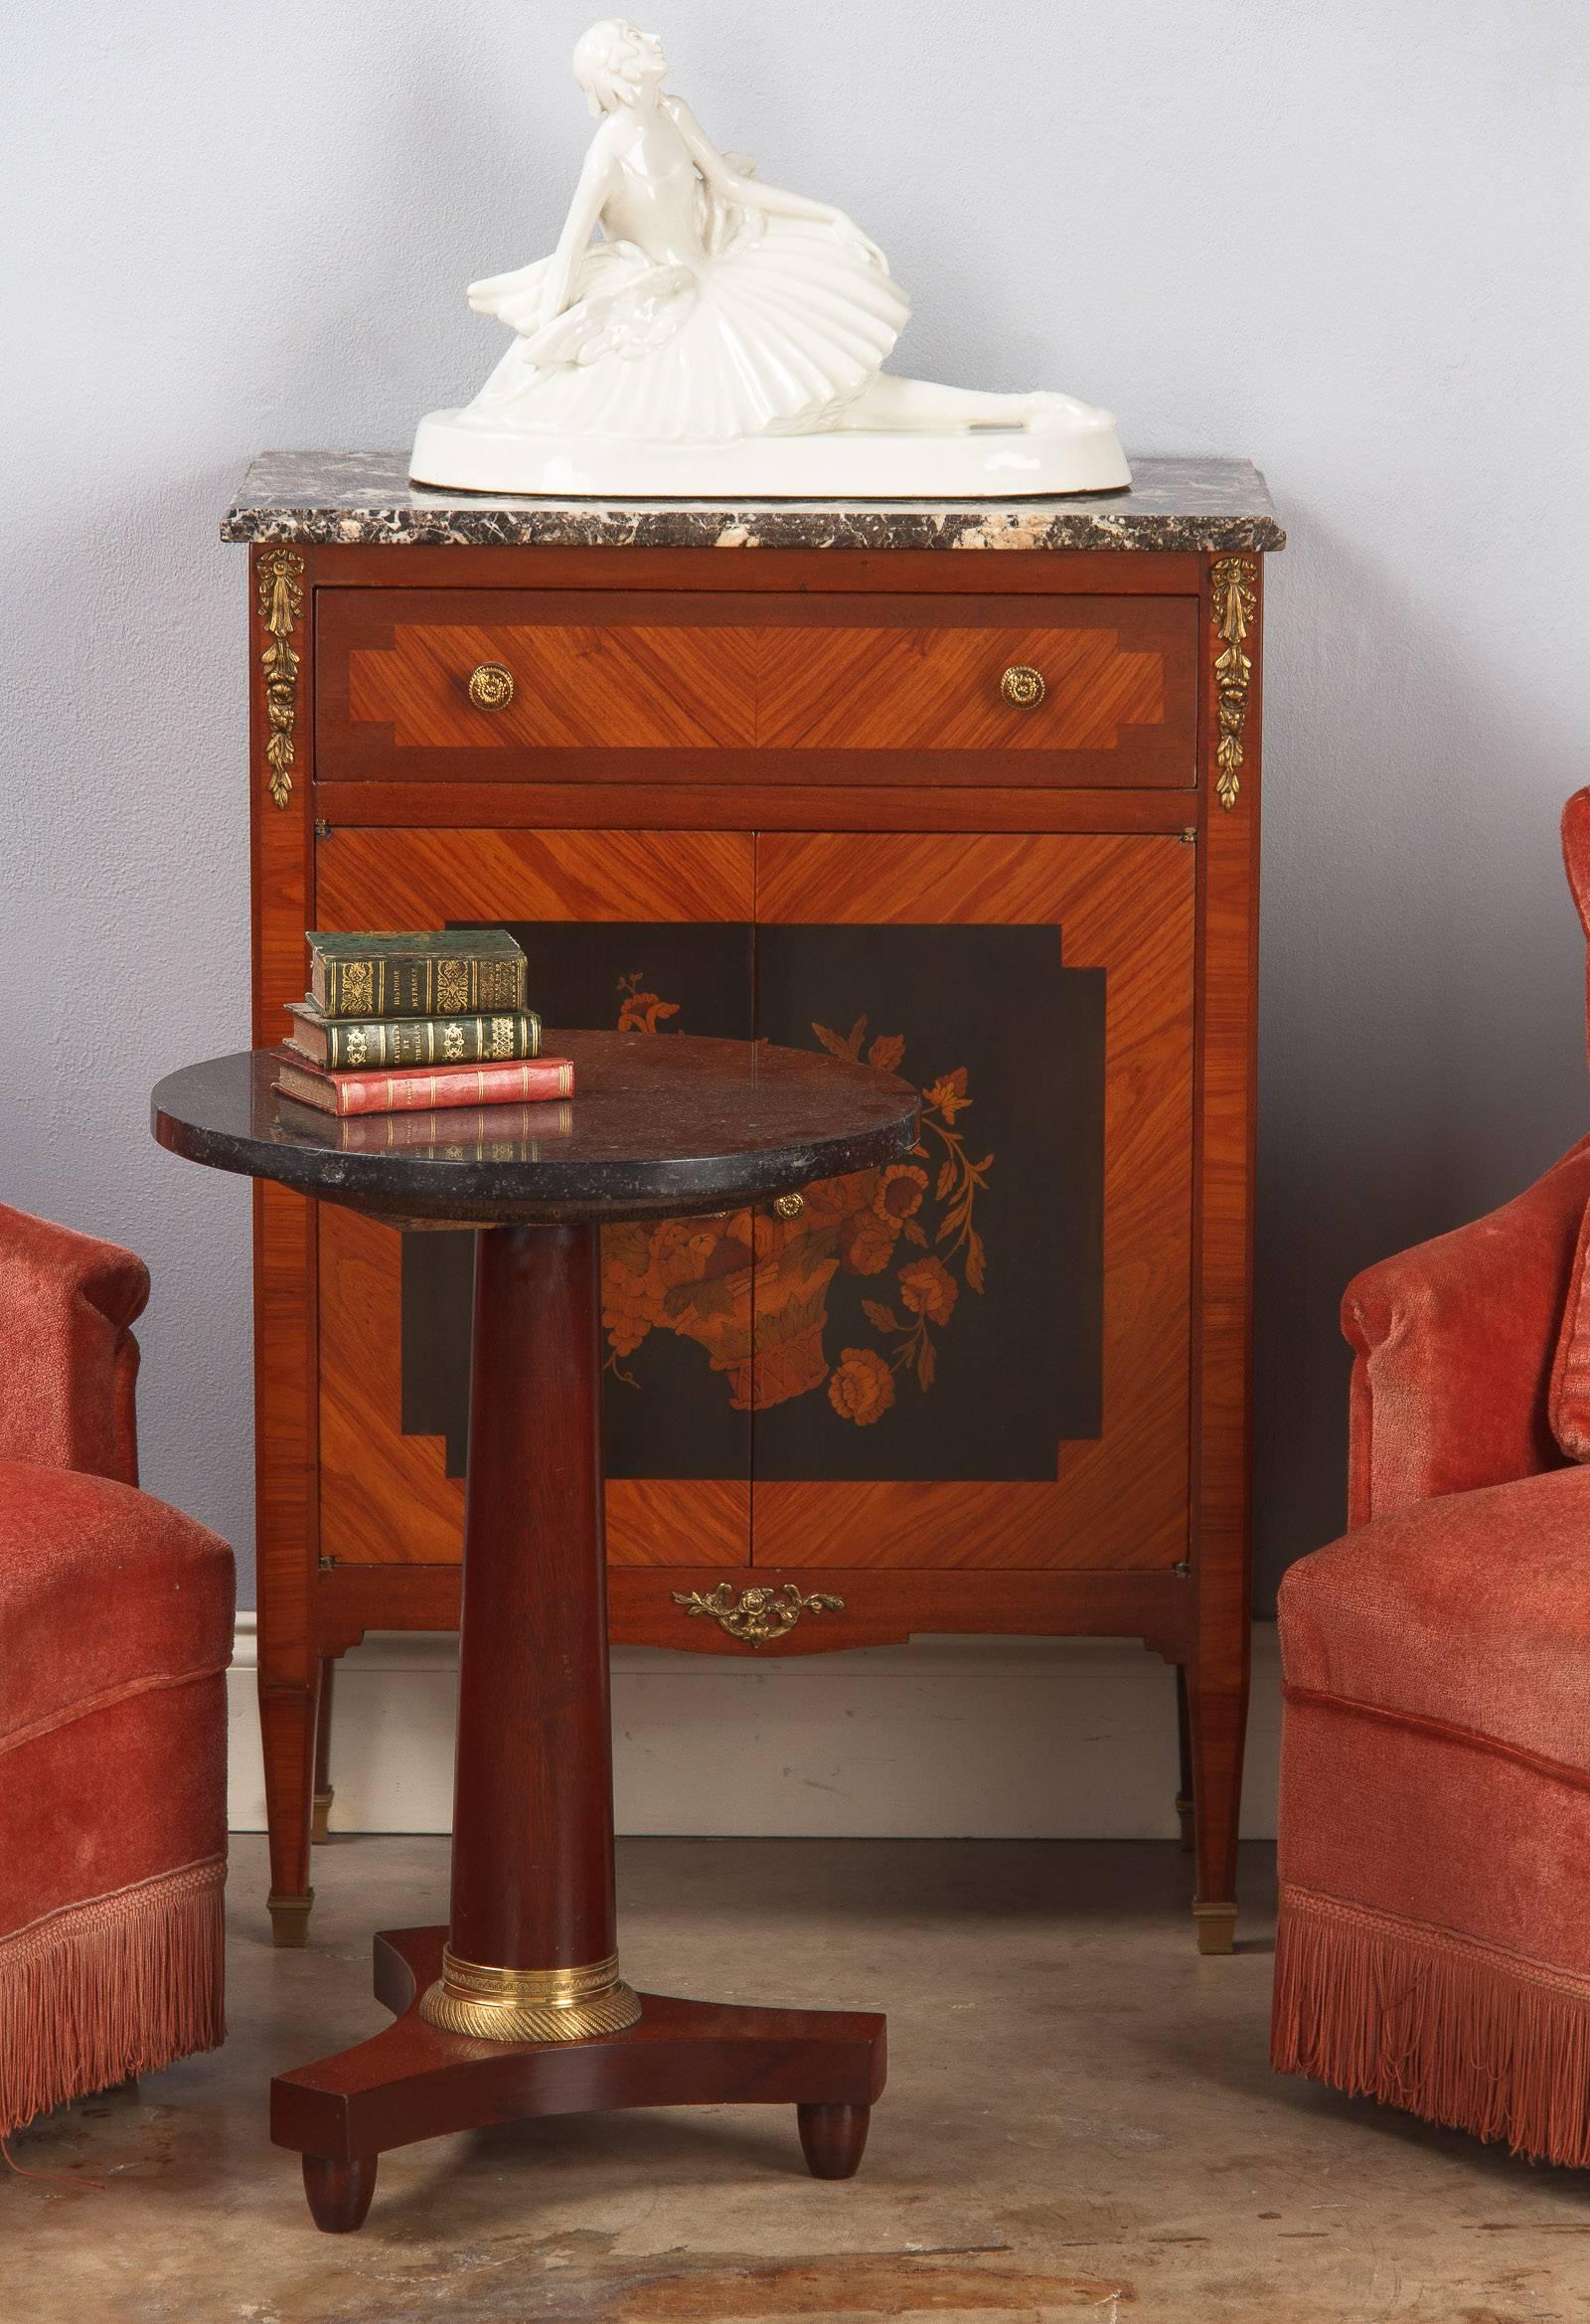 A French Empire style small pedestal table or gueridon made of red mahogany with a decorative brass ring and topped with a round black marble. Quite a lovely table with lots of character. Perfect for a side table or between two chairs. 